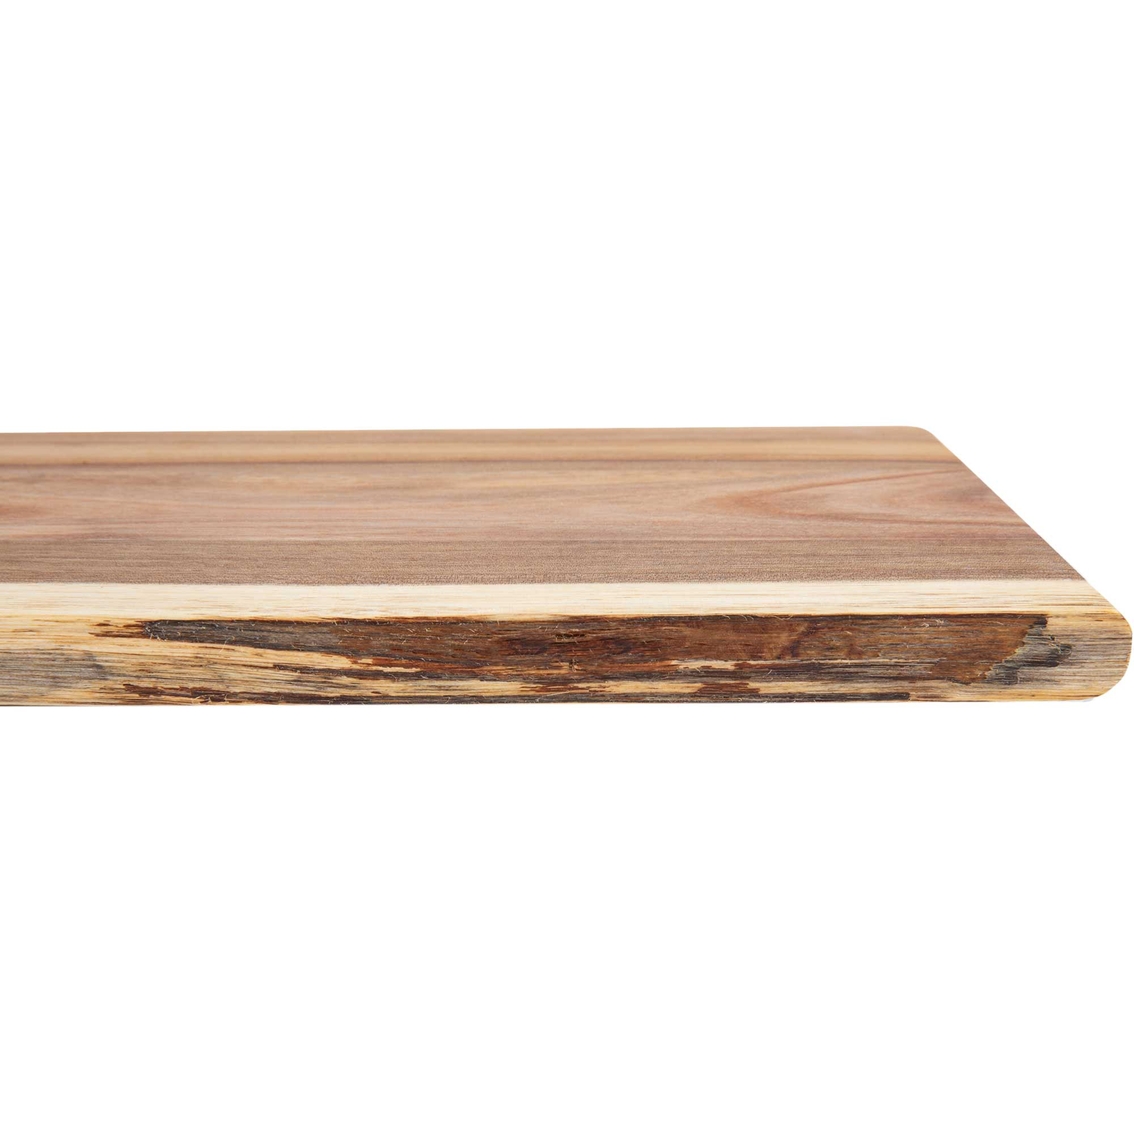 Picnic Time Artisan 24 in. Acacia Serving Plank - Image 7 of 10